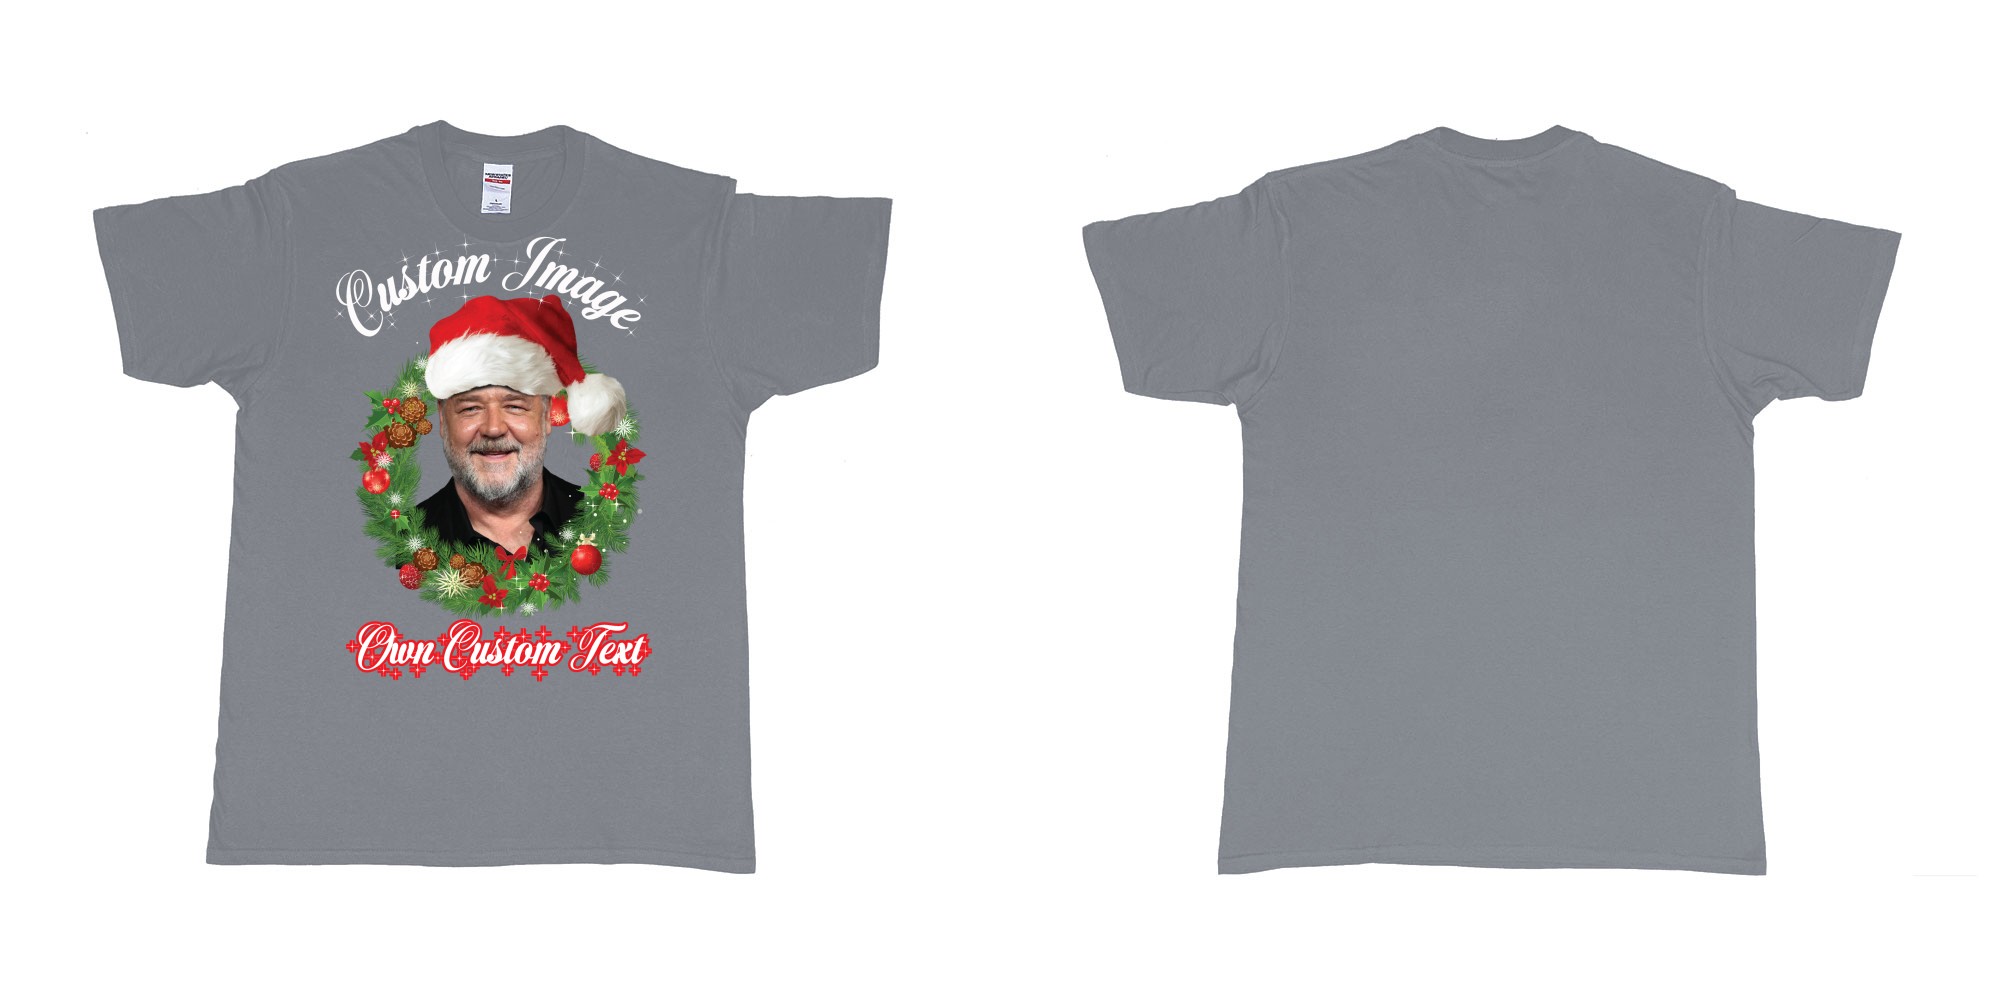 Custom tshirt design christmas wreath custom face image text in fabric color misty choice your own text made in Bali by The Pirate Way